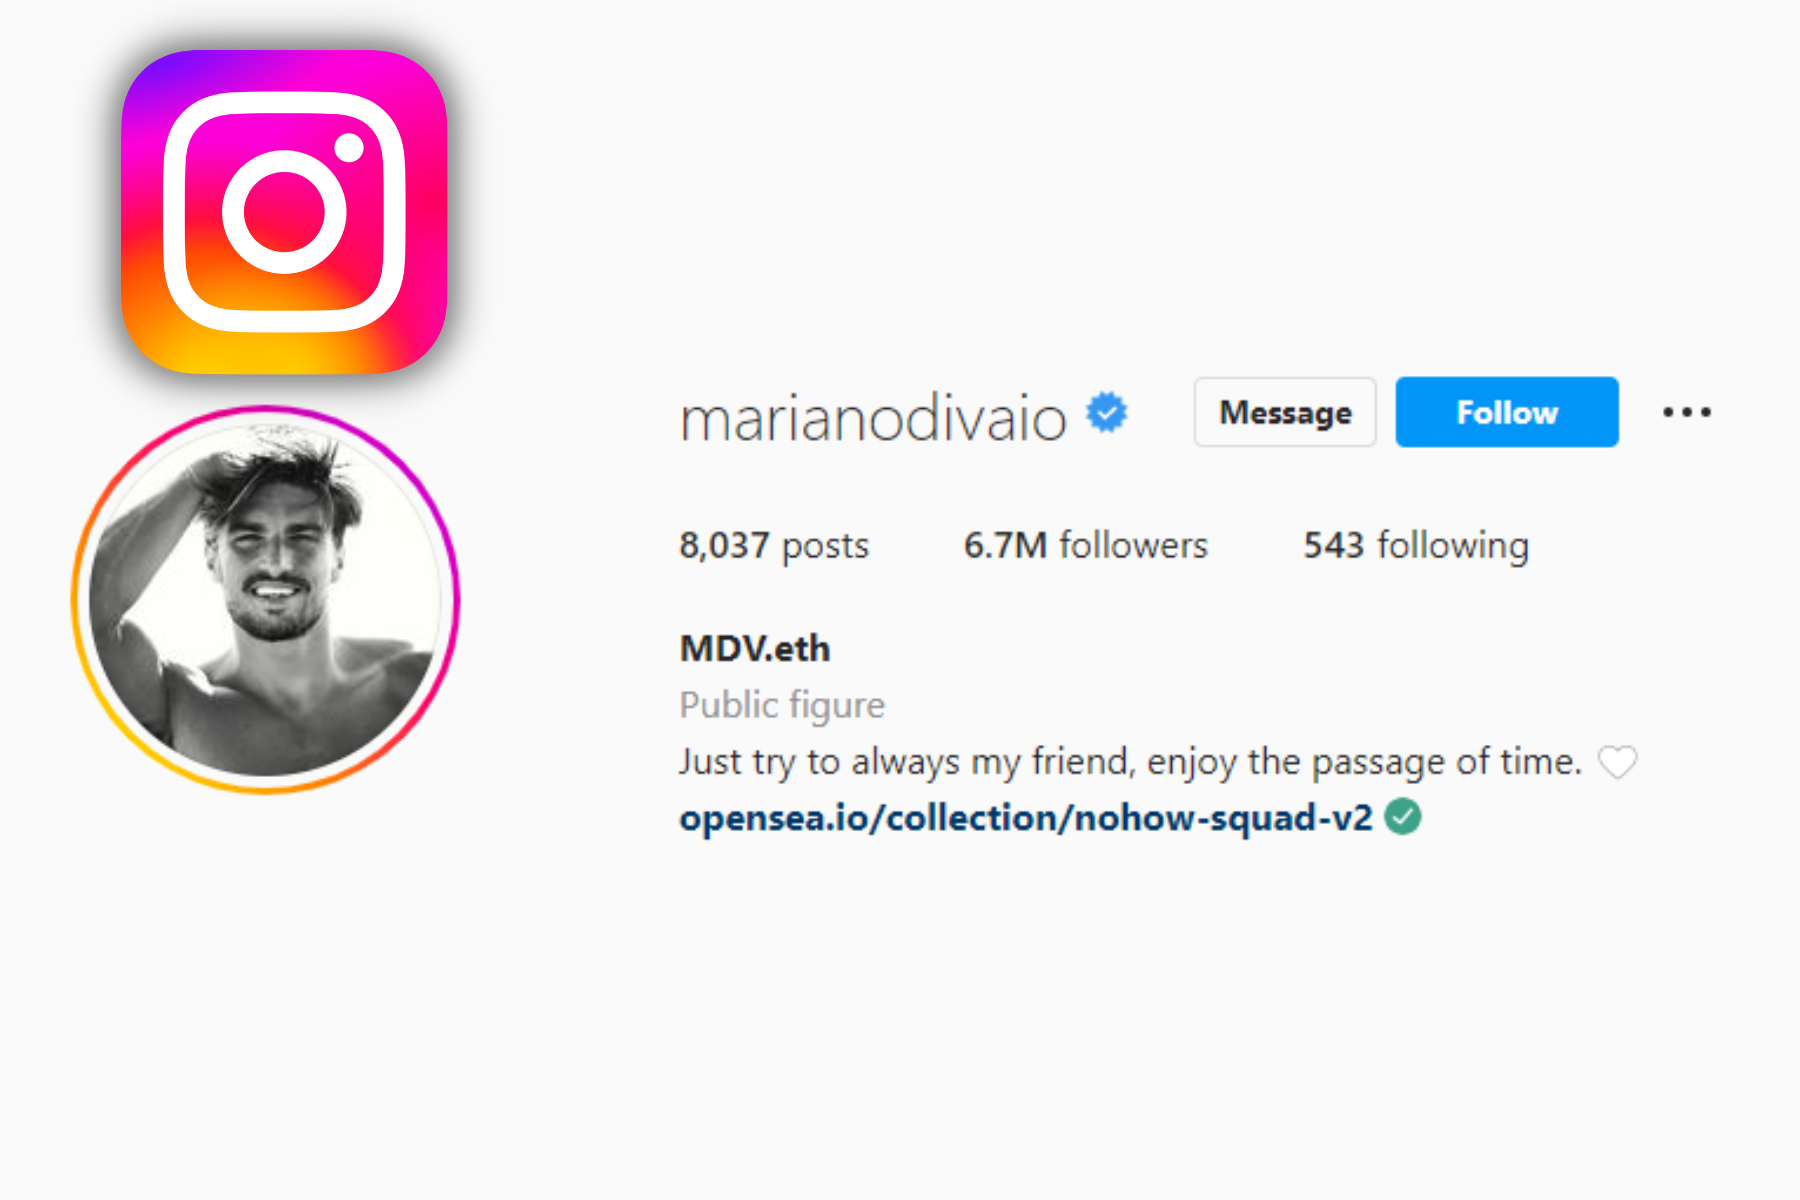 Mariano Di Vaio's Instagram account with 6.7 million followers